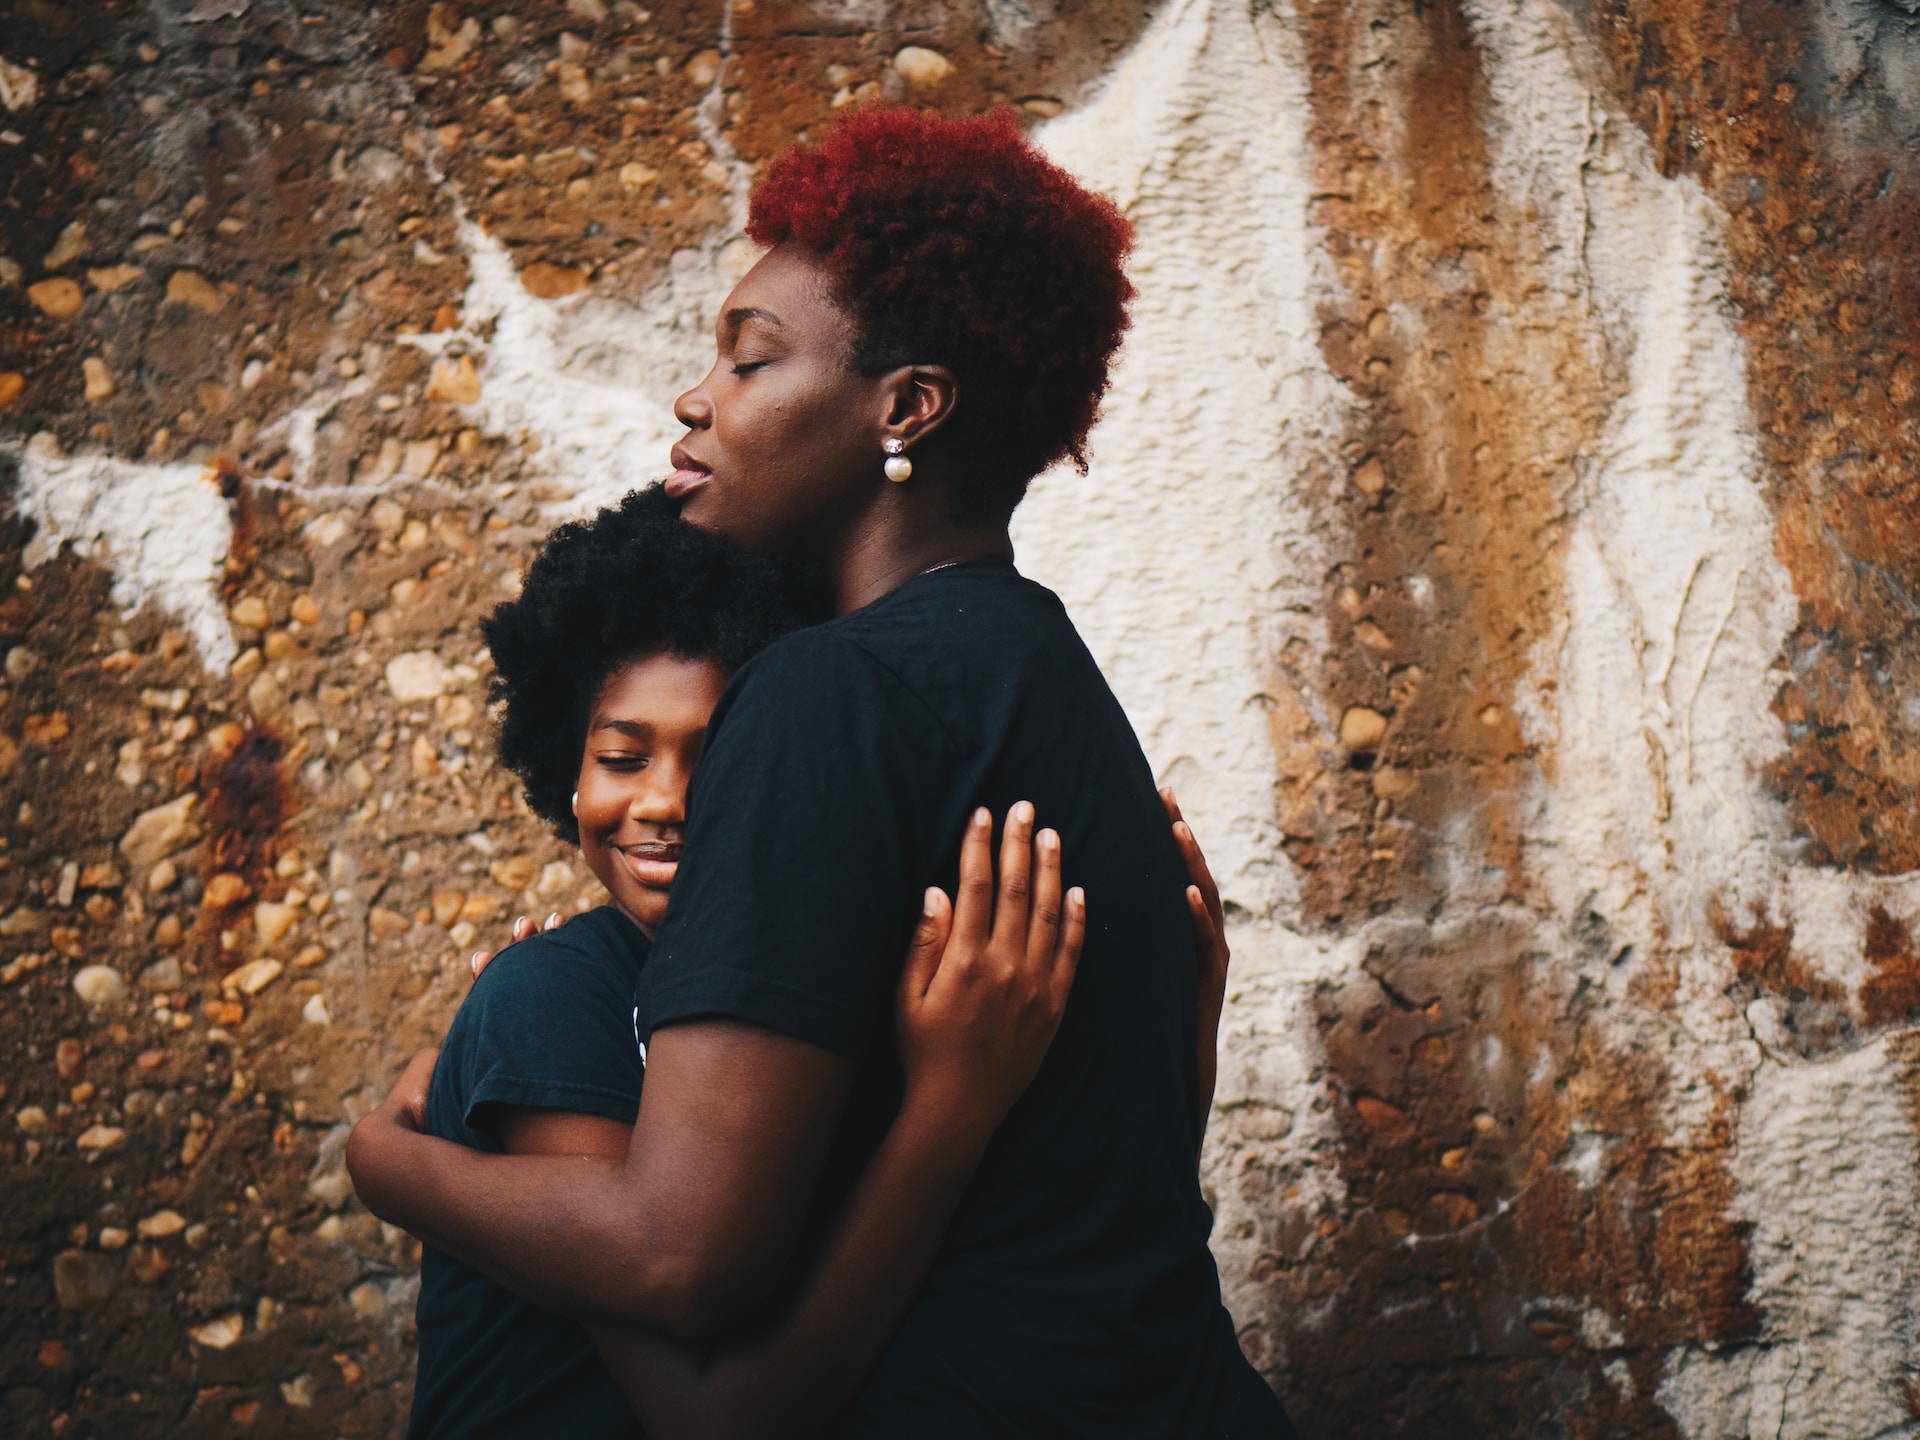 A young black girl hugging a black adult woman against a brown and white wall with stones in it. The young girl is smiling. They both have their eyes closed. The black adult woman has red hair and pearl earrings.